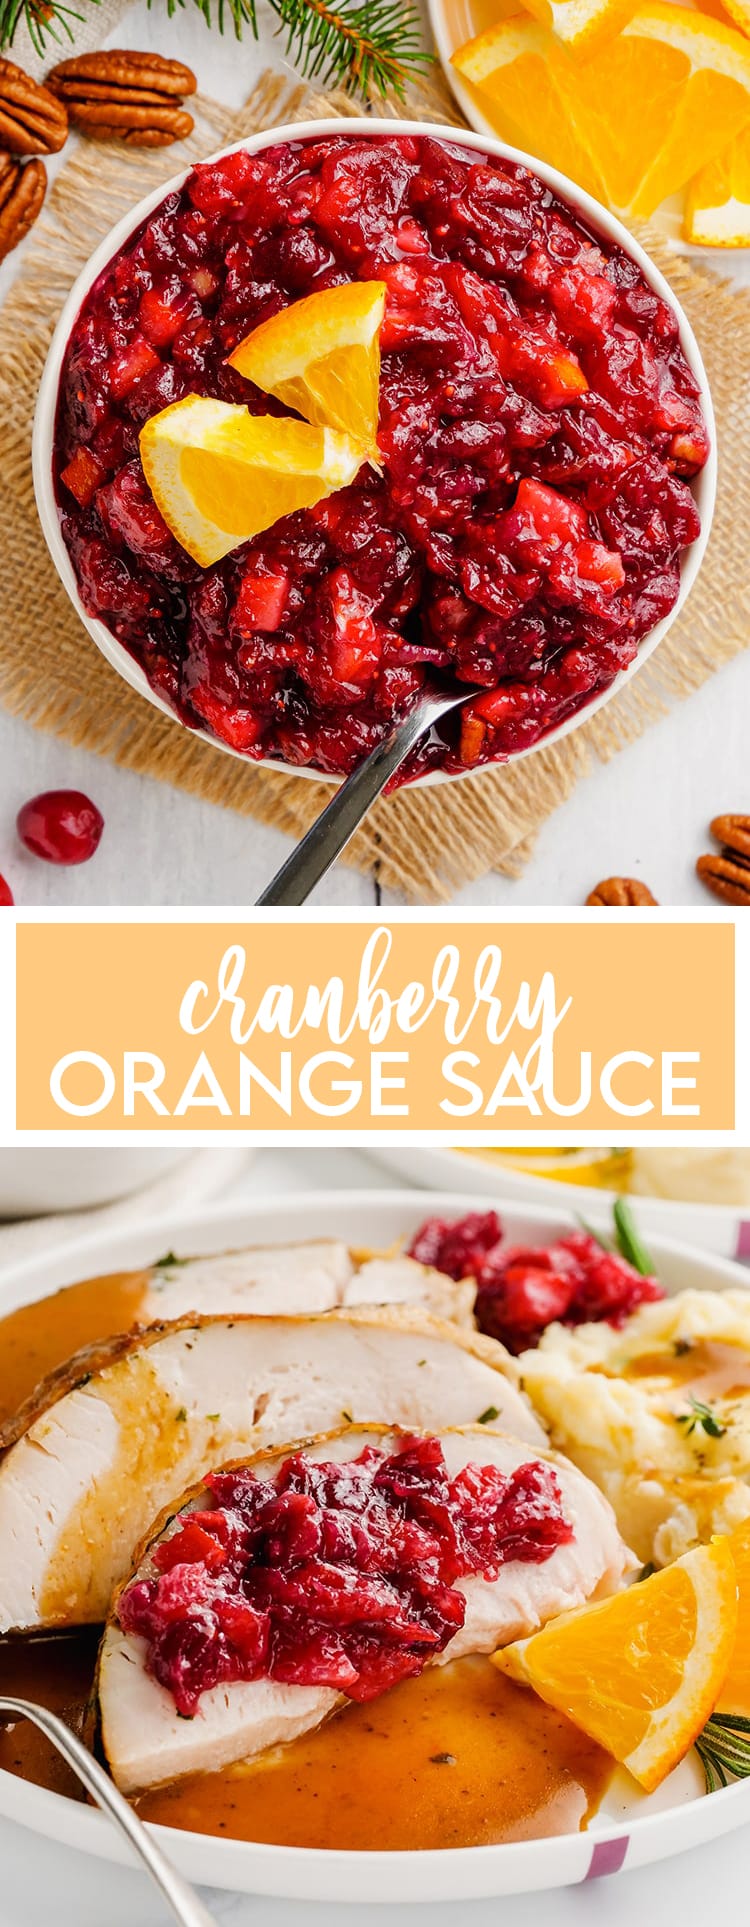 A collage of two photos of cranberry orange sauce. The first is in a bowl. The second is cranberry sauce on slices of turkey.